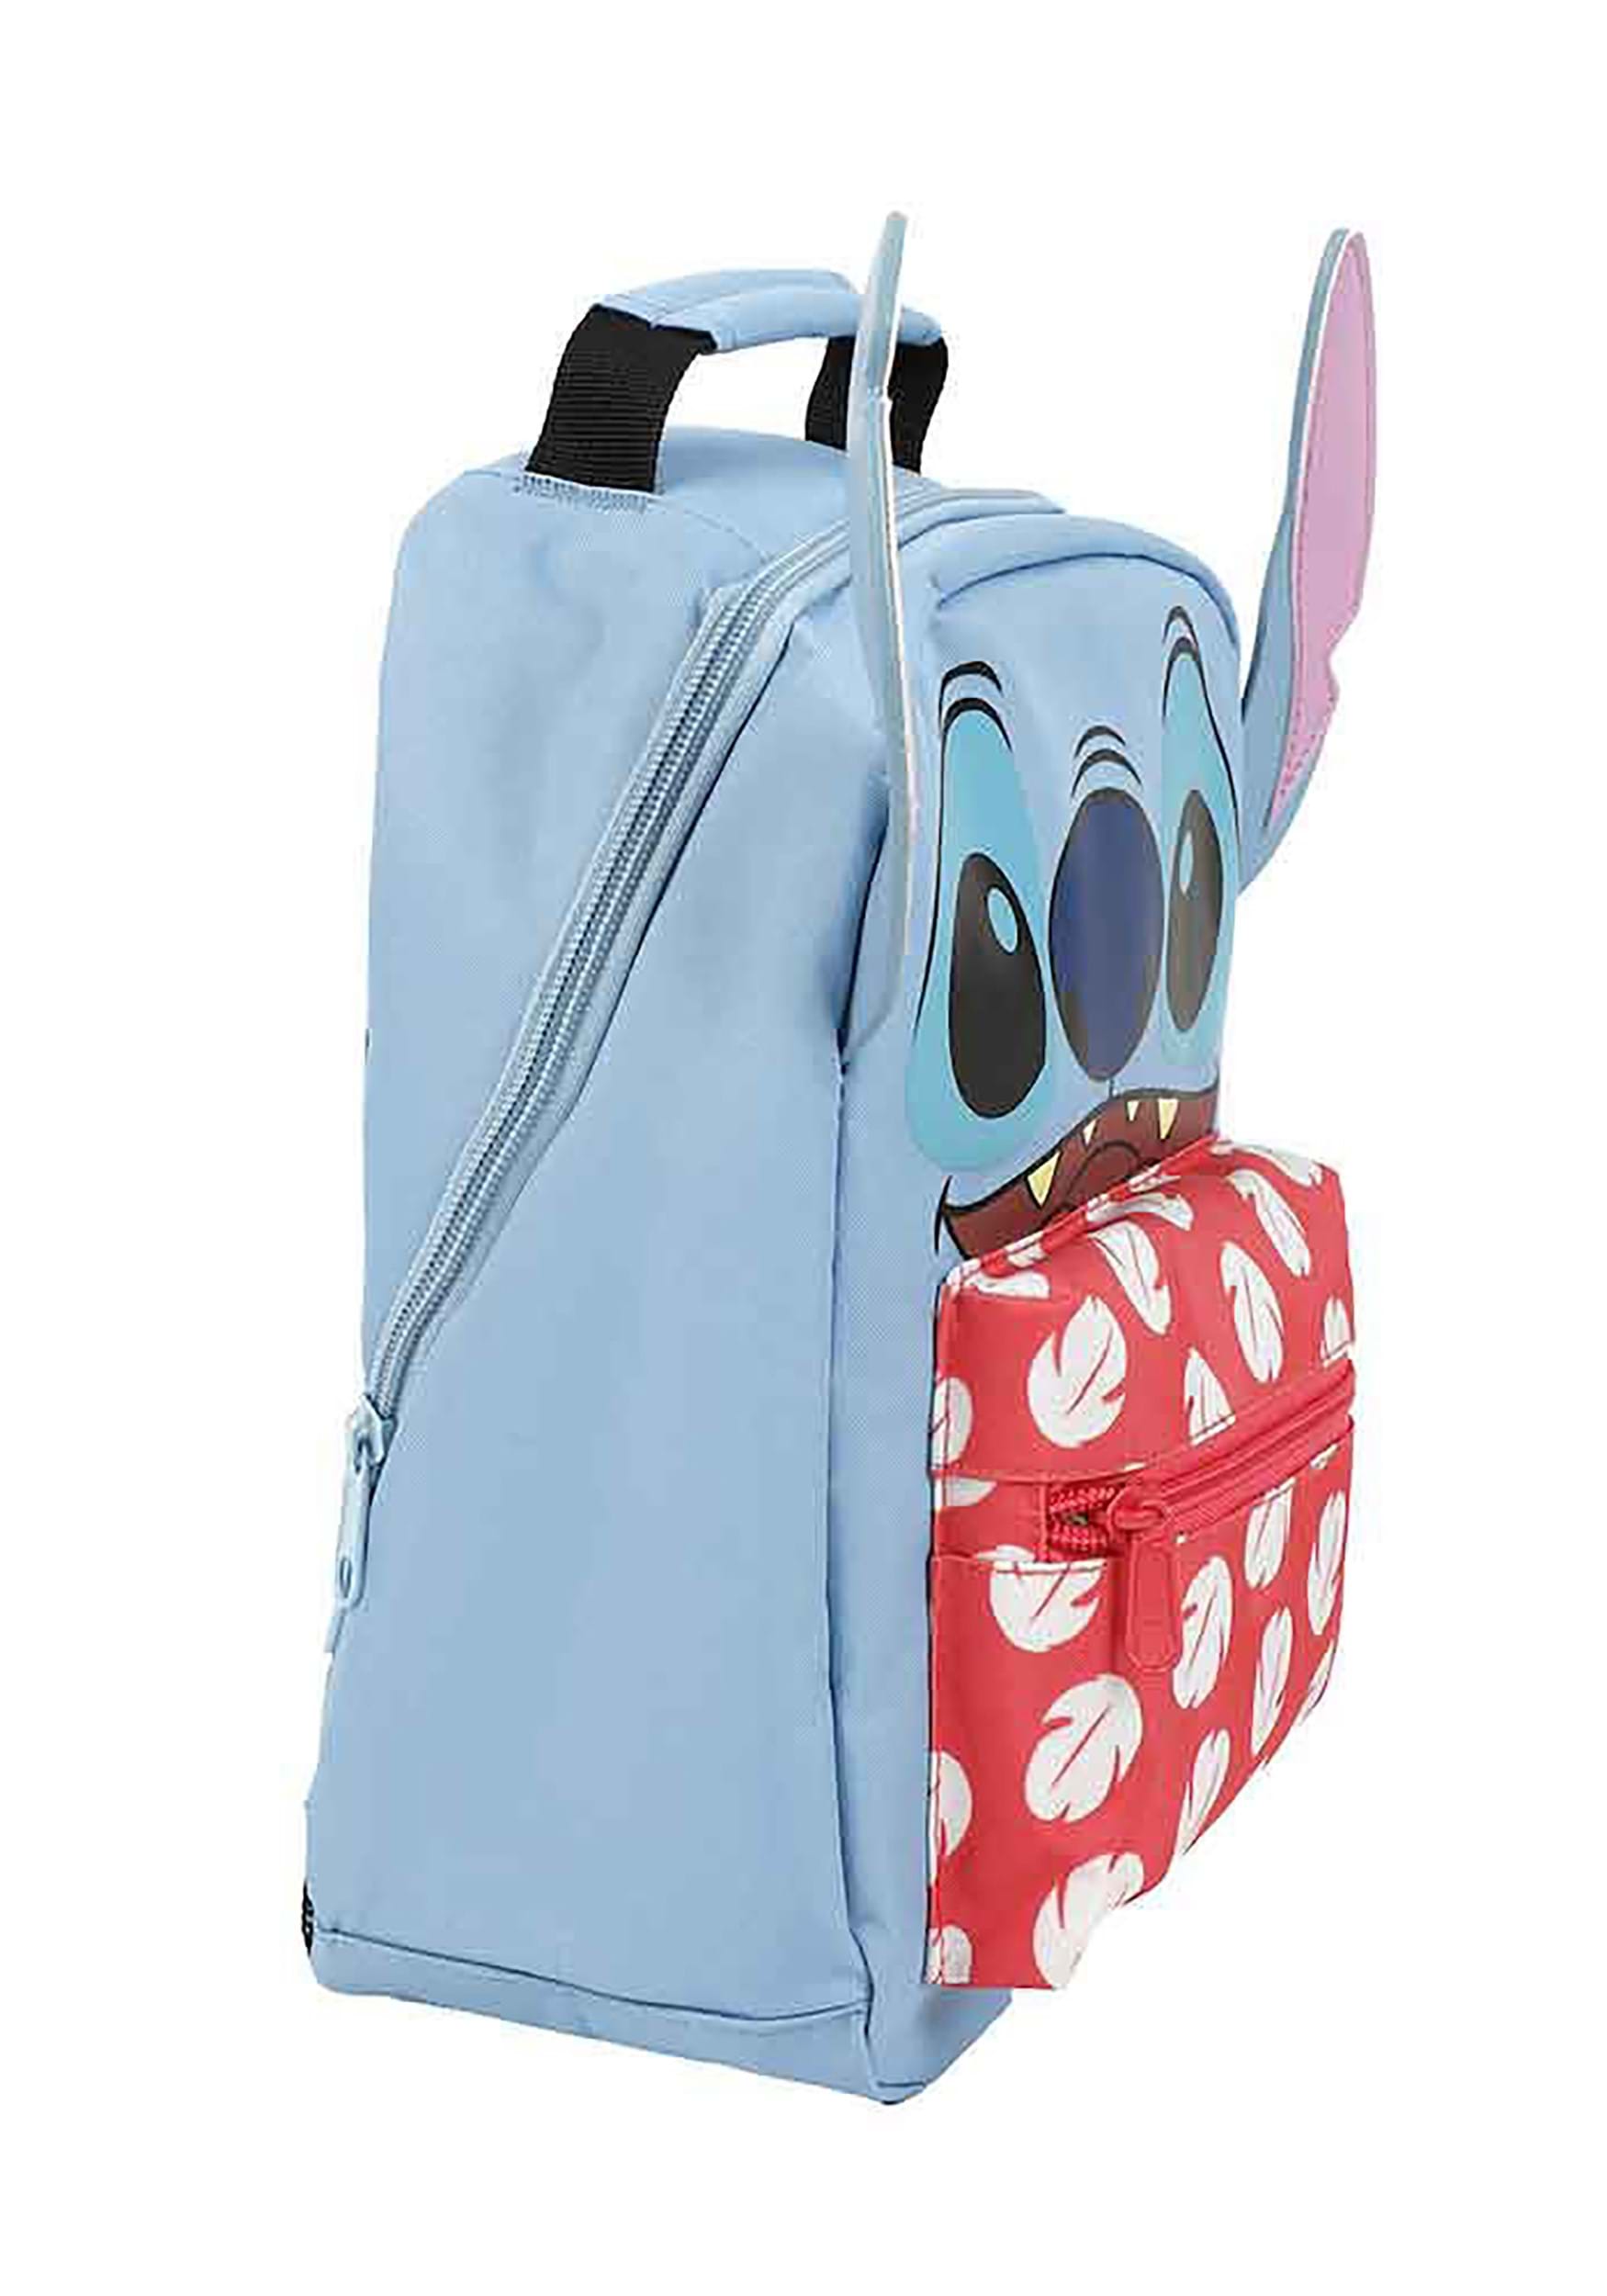 https://images.fun.com/products/86679/2-1-238575/disney-stitch-decorative-3d-insulated-lunch-tote-alt-1.jpg